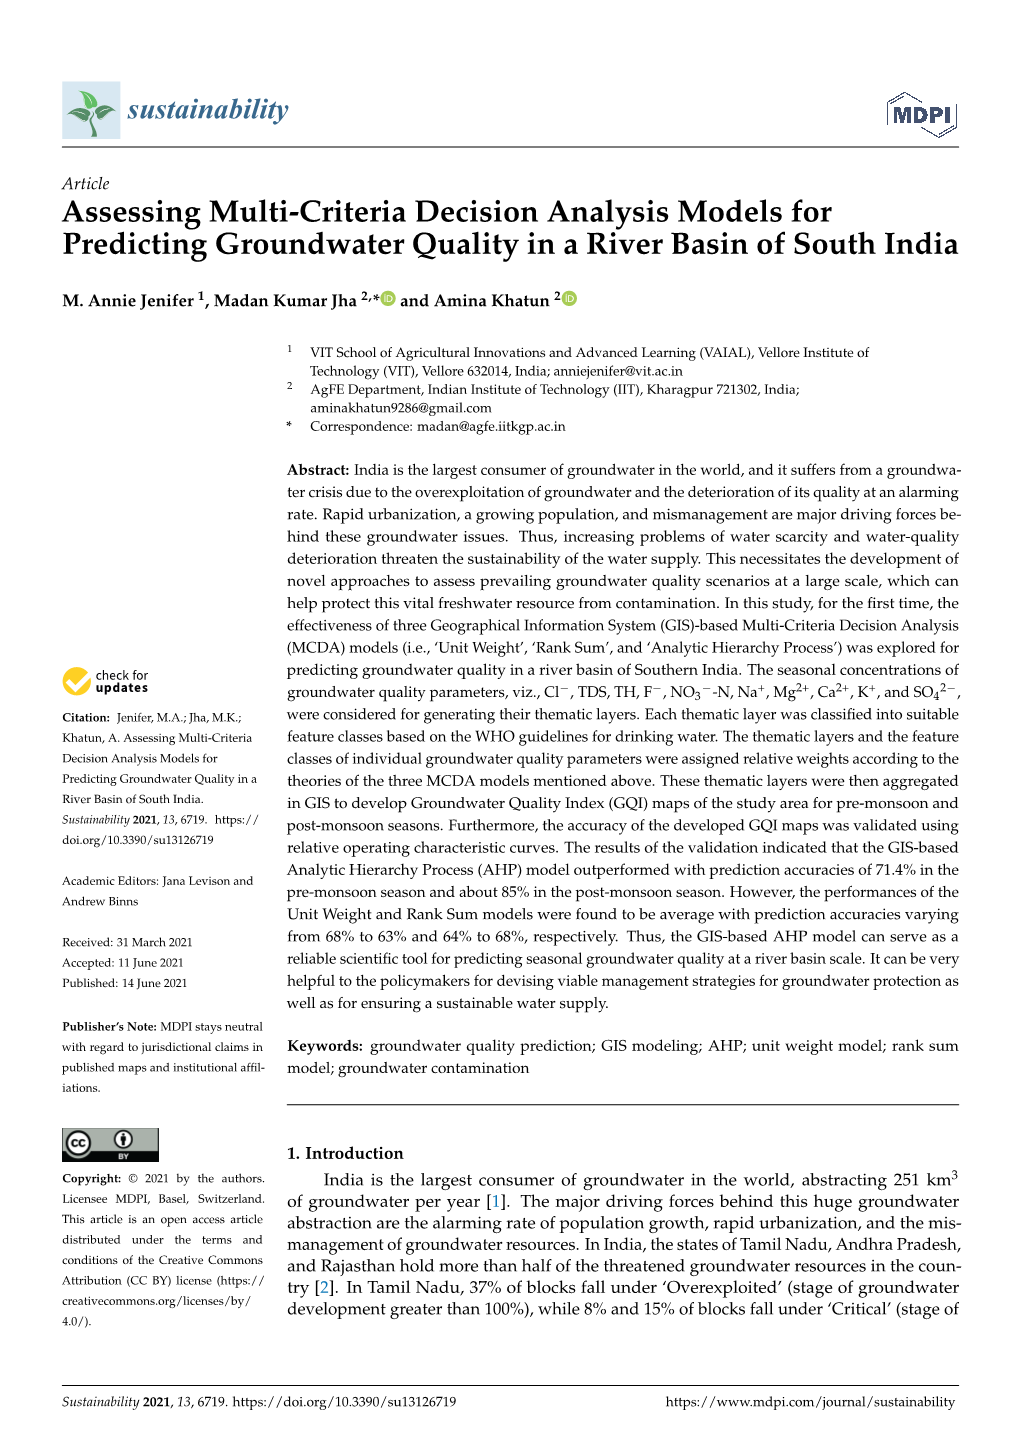 Assessing Multi-Criteria Decision Analysis Models for Predicting Groundwater Quality in a River Basin of South India